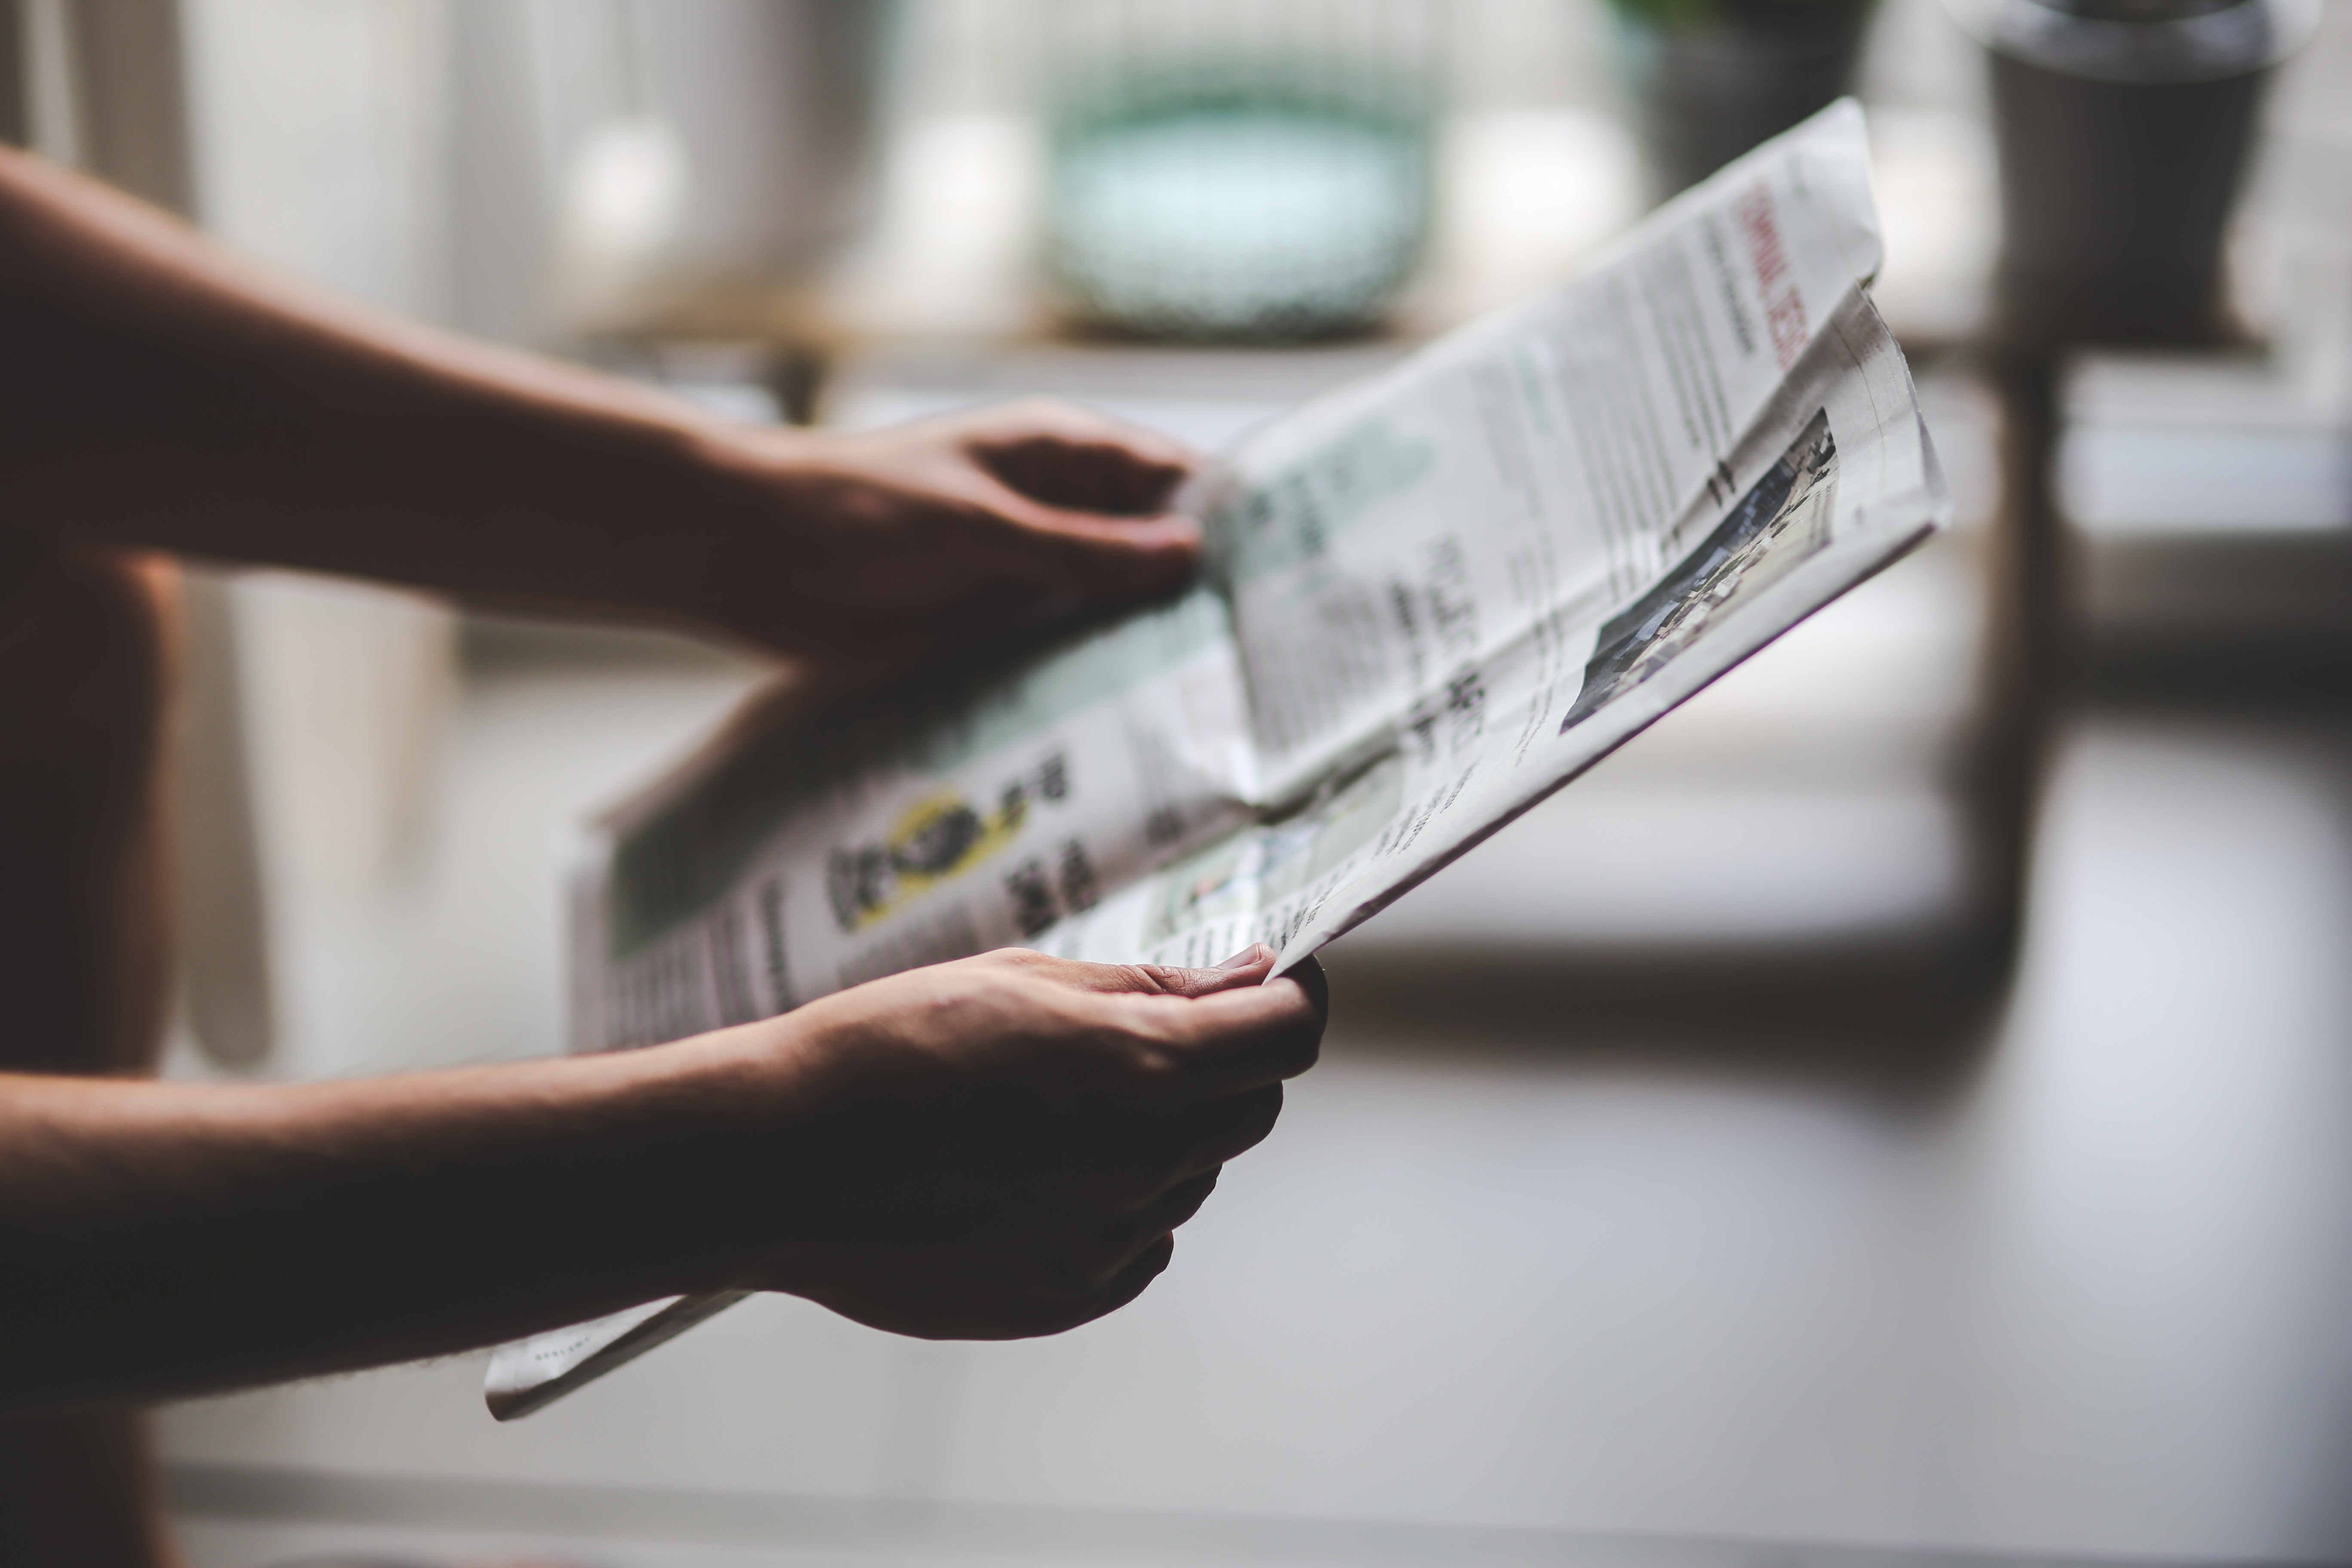 Image of a person's hands holding a newspaper